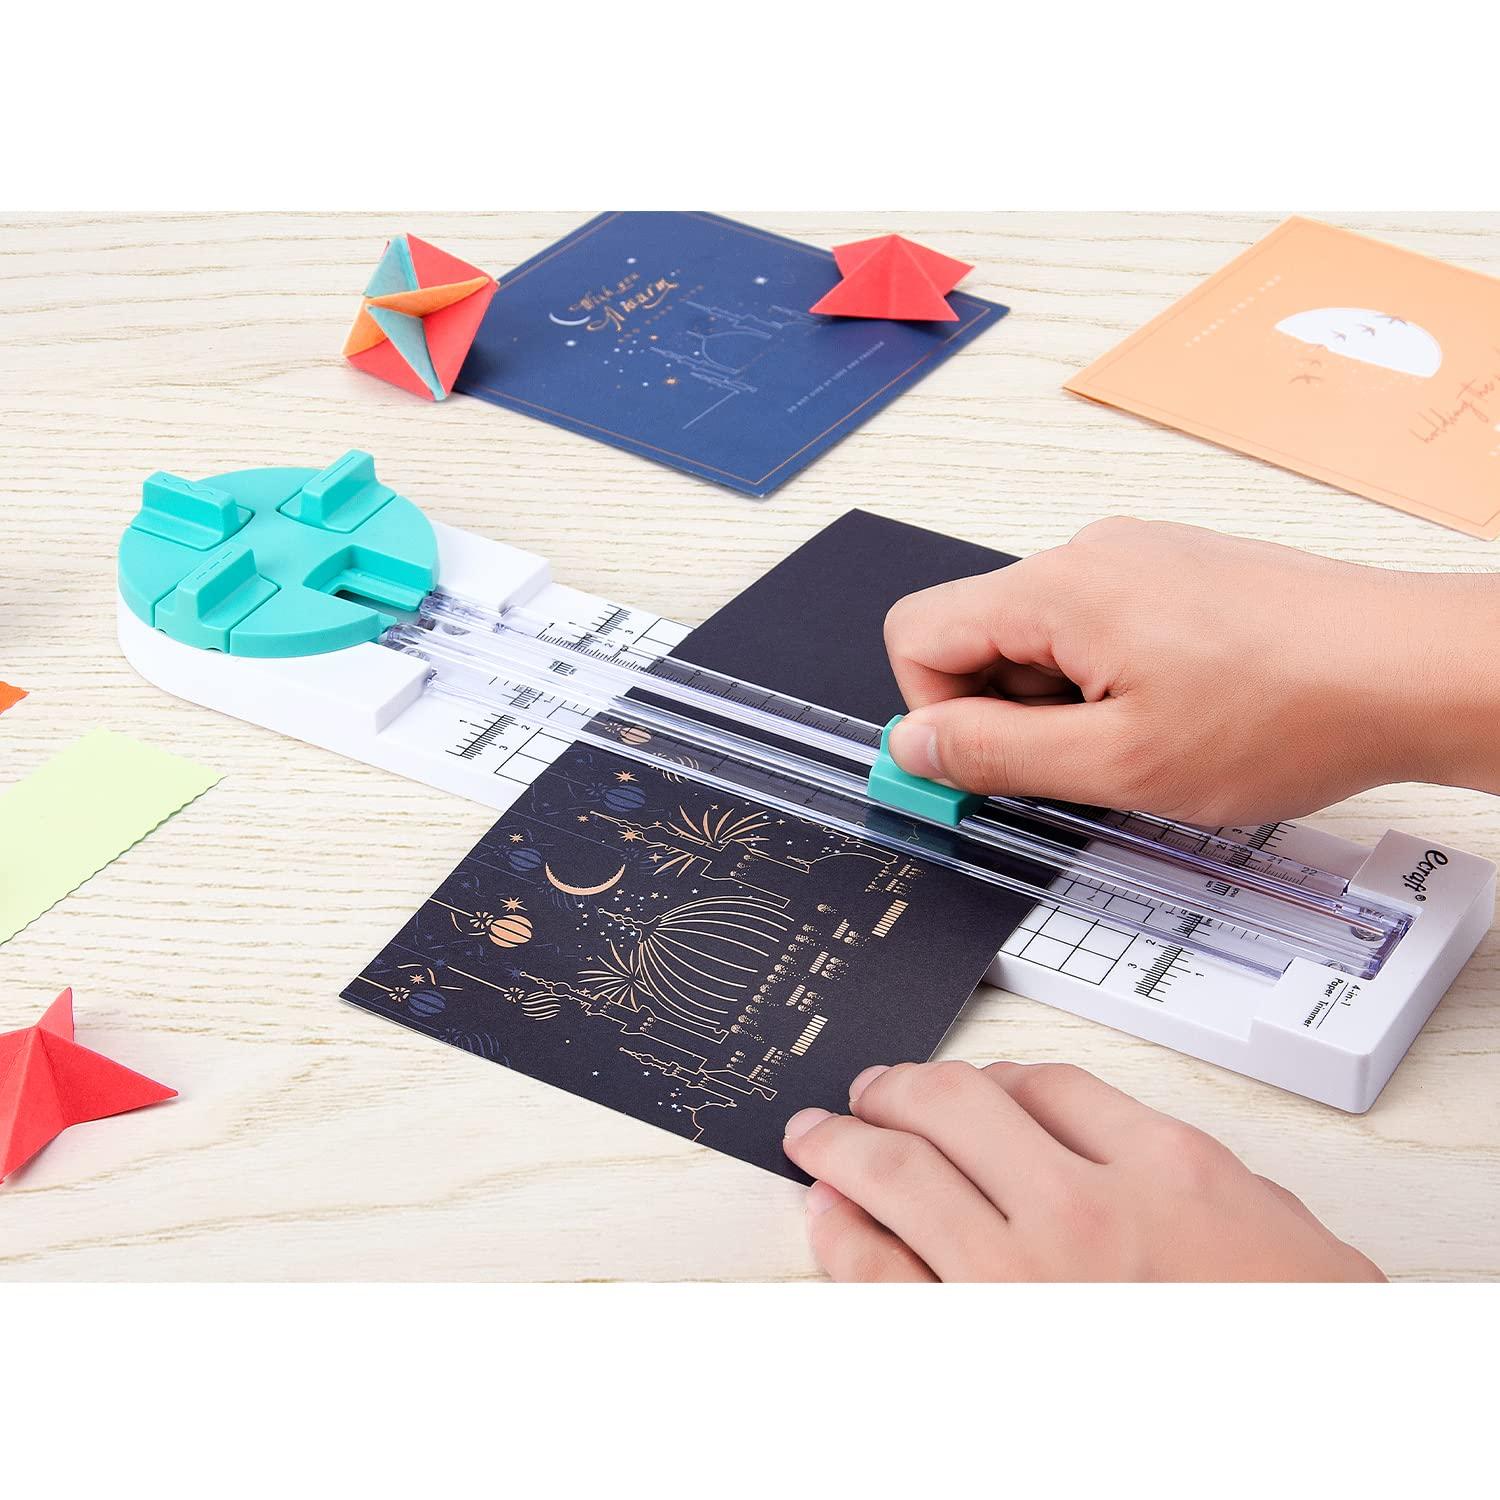 Paper Trimmer Craft Paper Cutter: 4 Style Multi-Function Scrapbooking Tool  with Dial Blades of (Straight,Wave,Perforated)12 pack Paper Cutter Blade